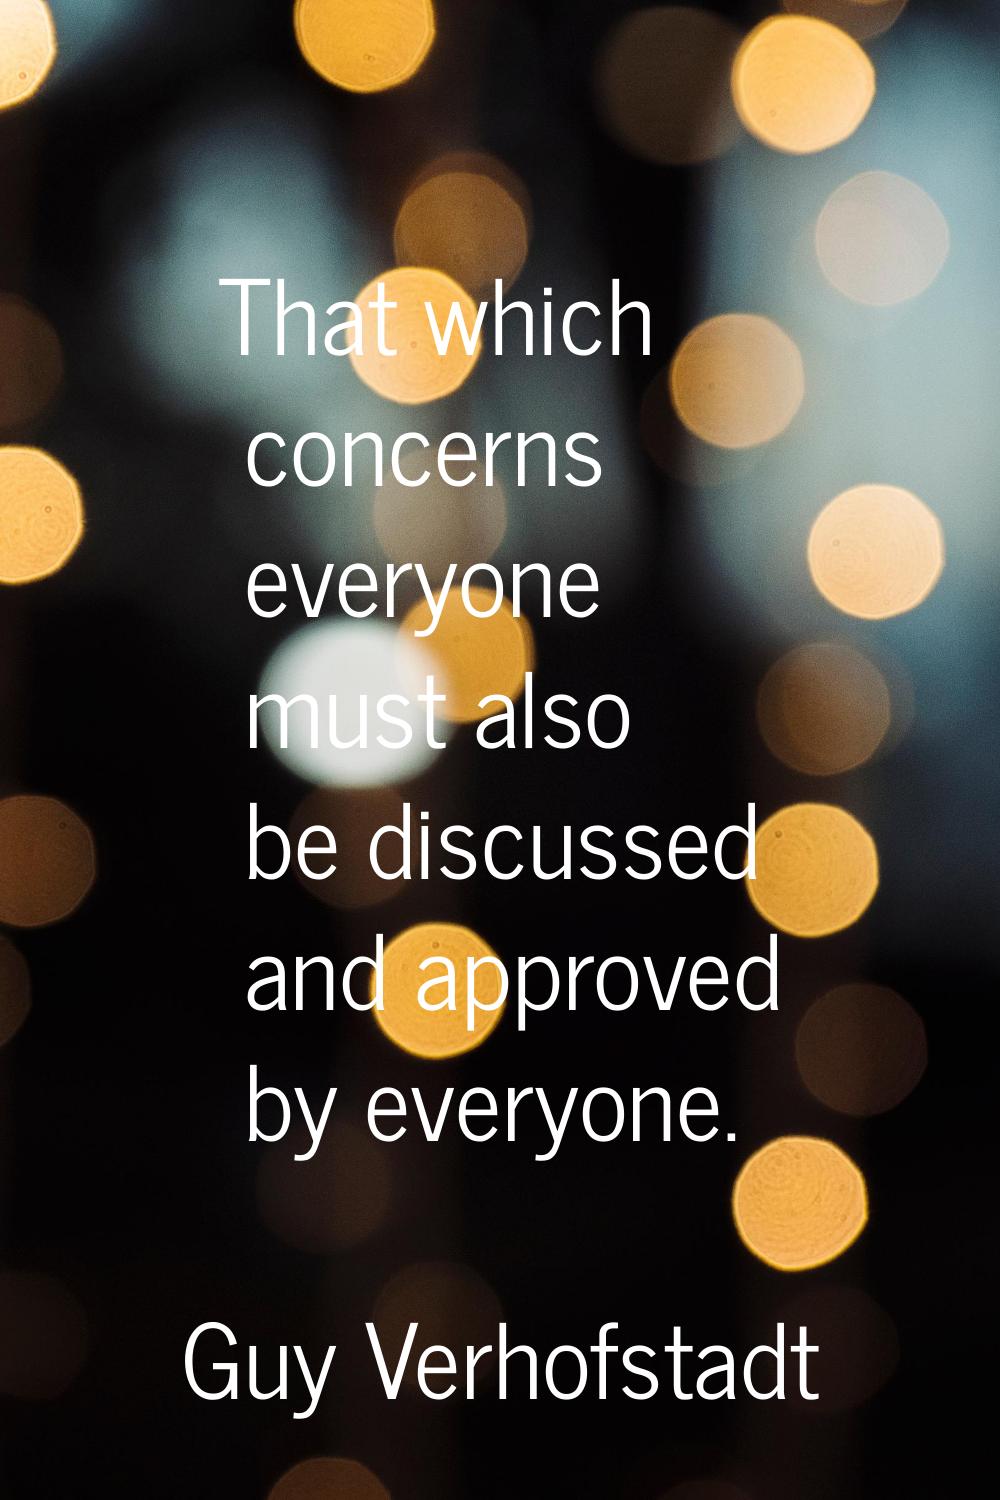 That which concerns everyone must also be discussed and approved by everyone.